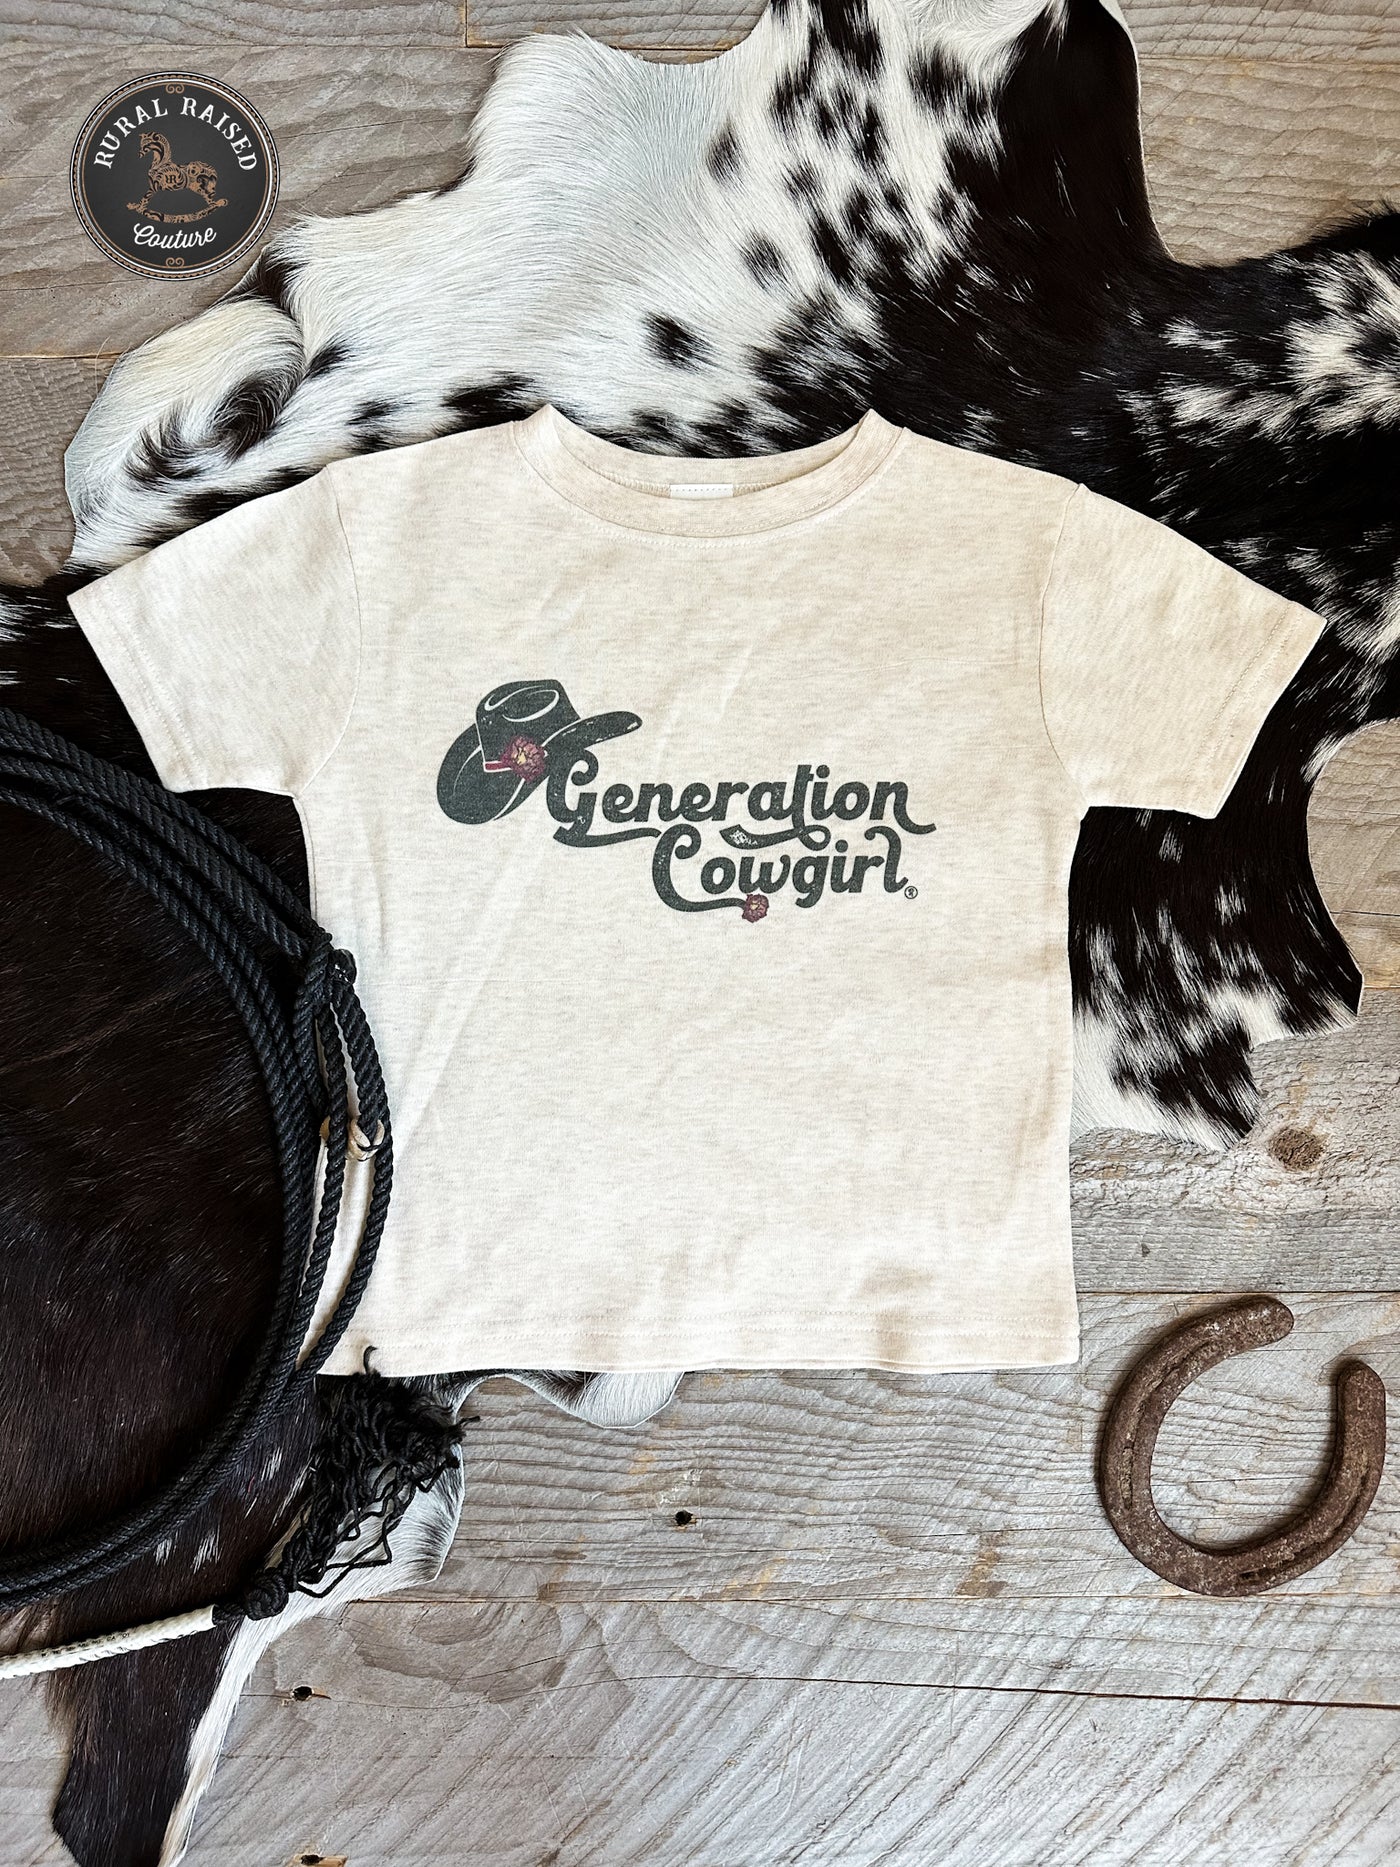 New Generation Cowgirl Tee